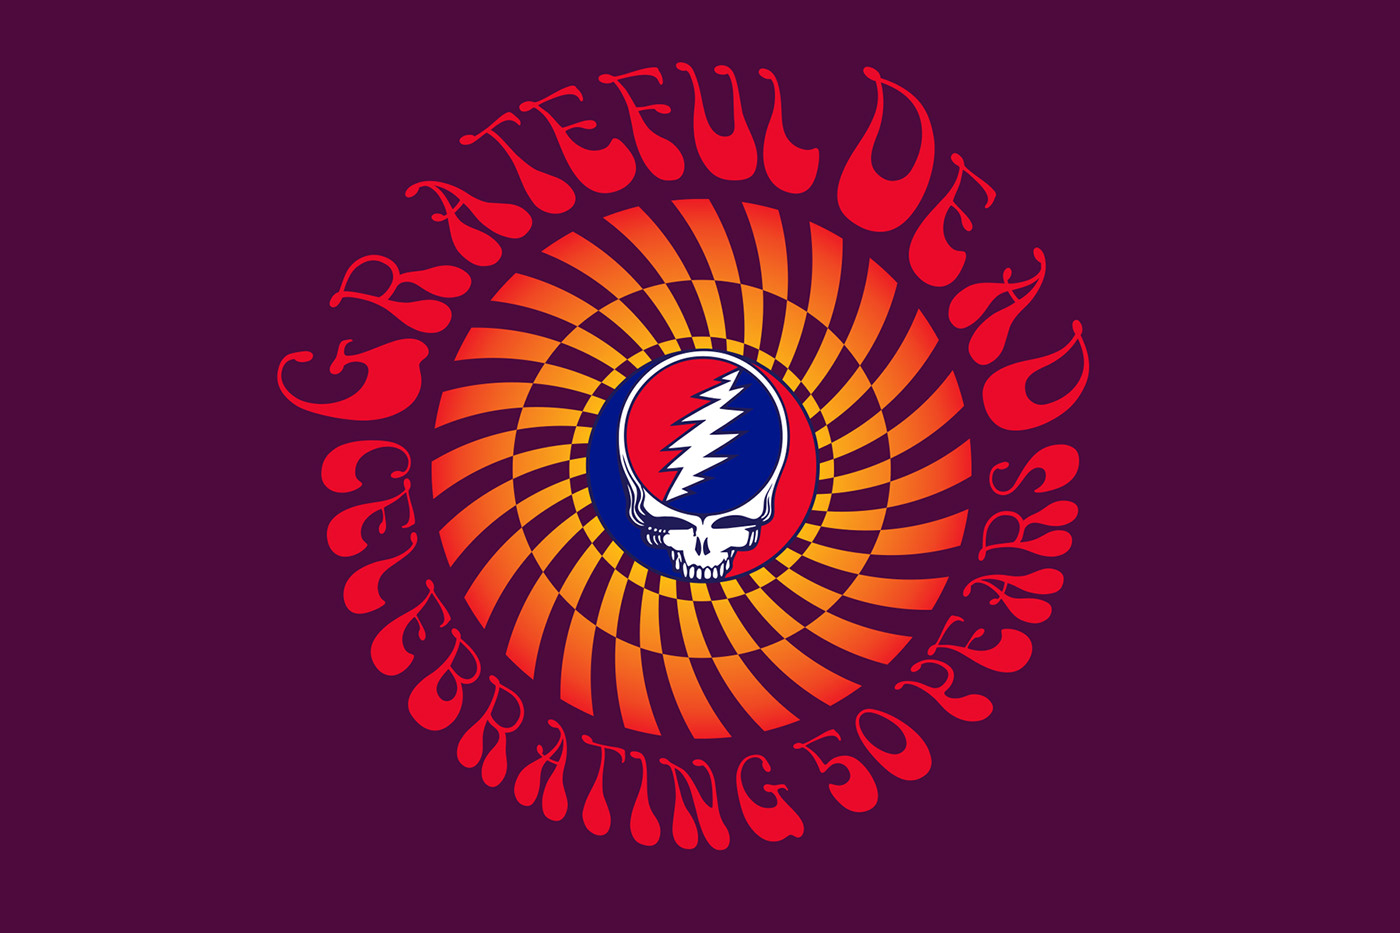 Grateful Dead "Fare Thee Well" Logotype & Spral T-shirt design by Christopher Jennings.